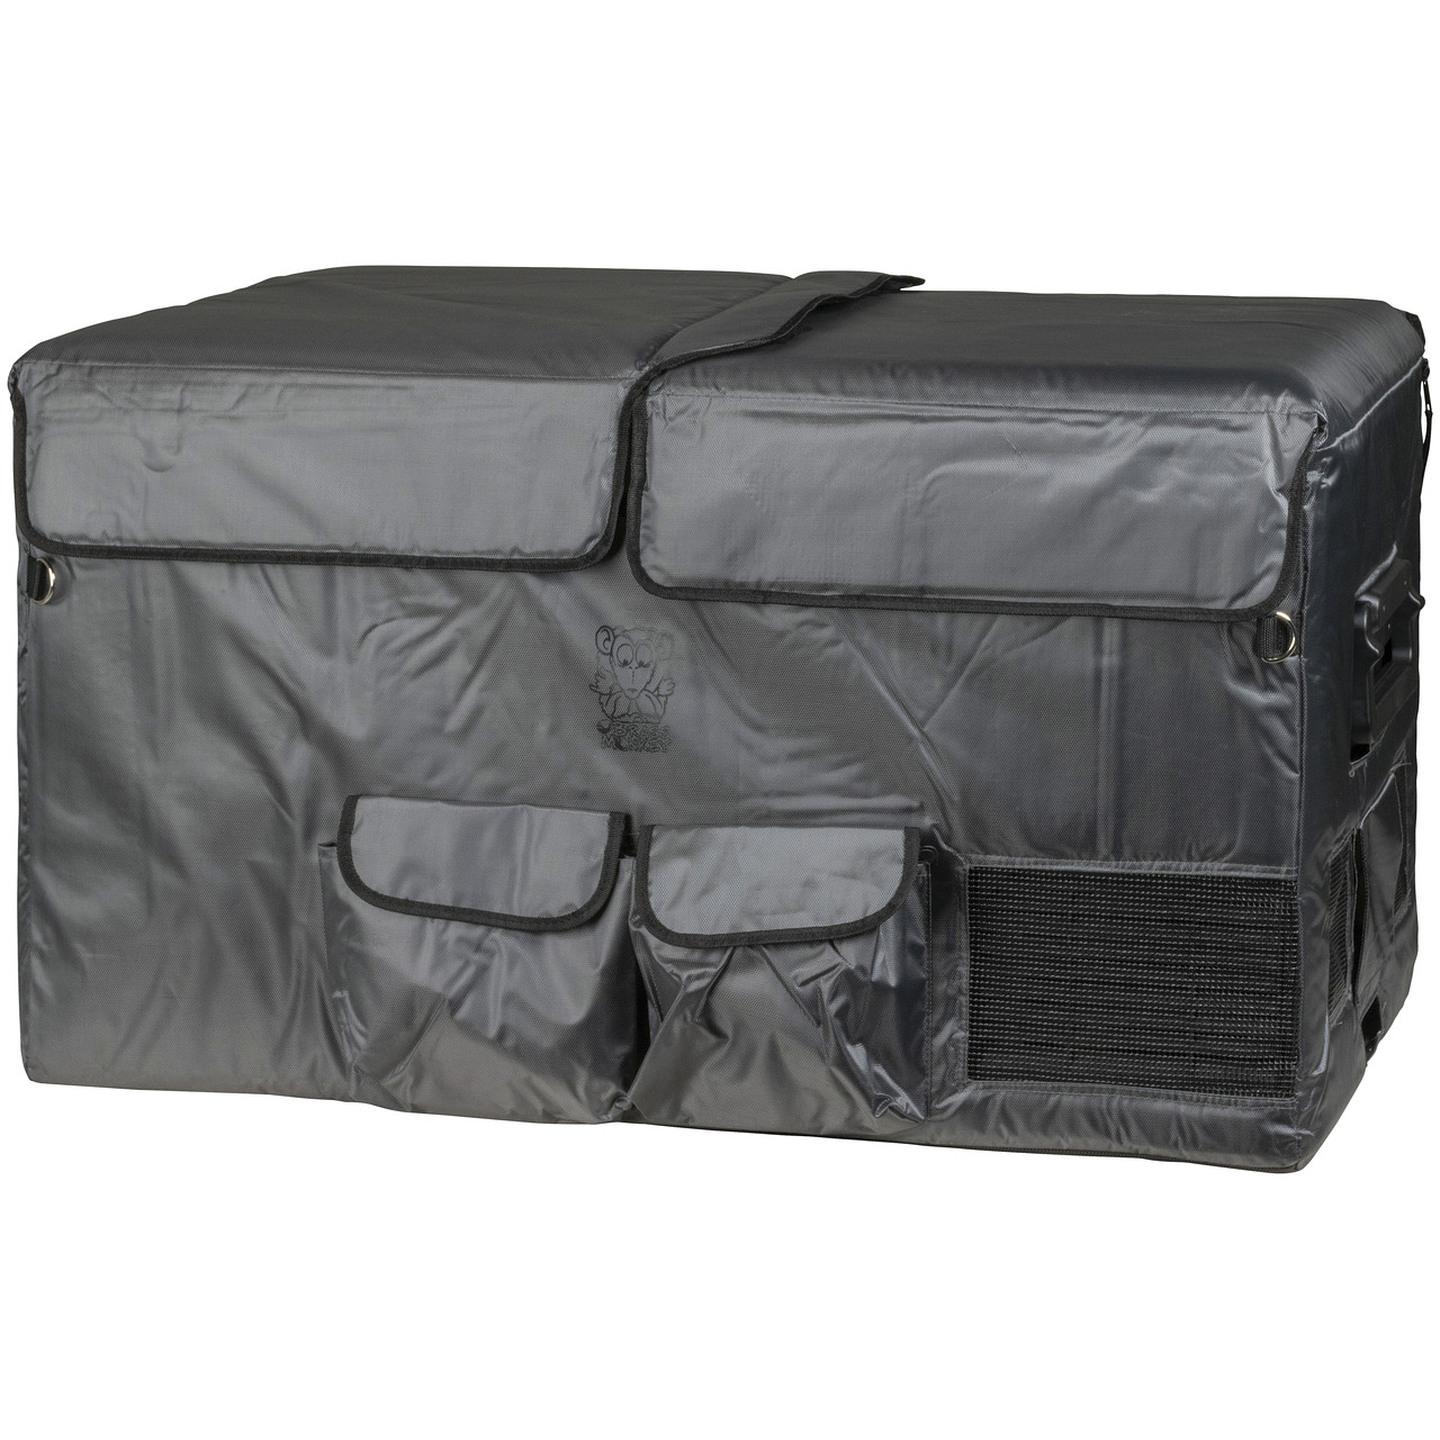 Grey Insulated Cover for 75L Brass Monkey Portable Fishing Fridge/Freezer